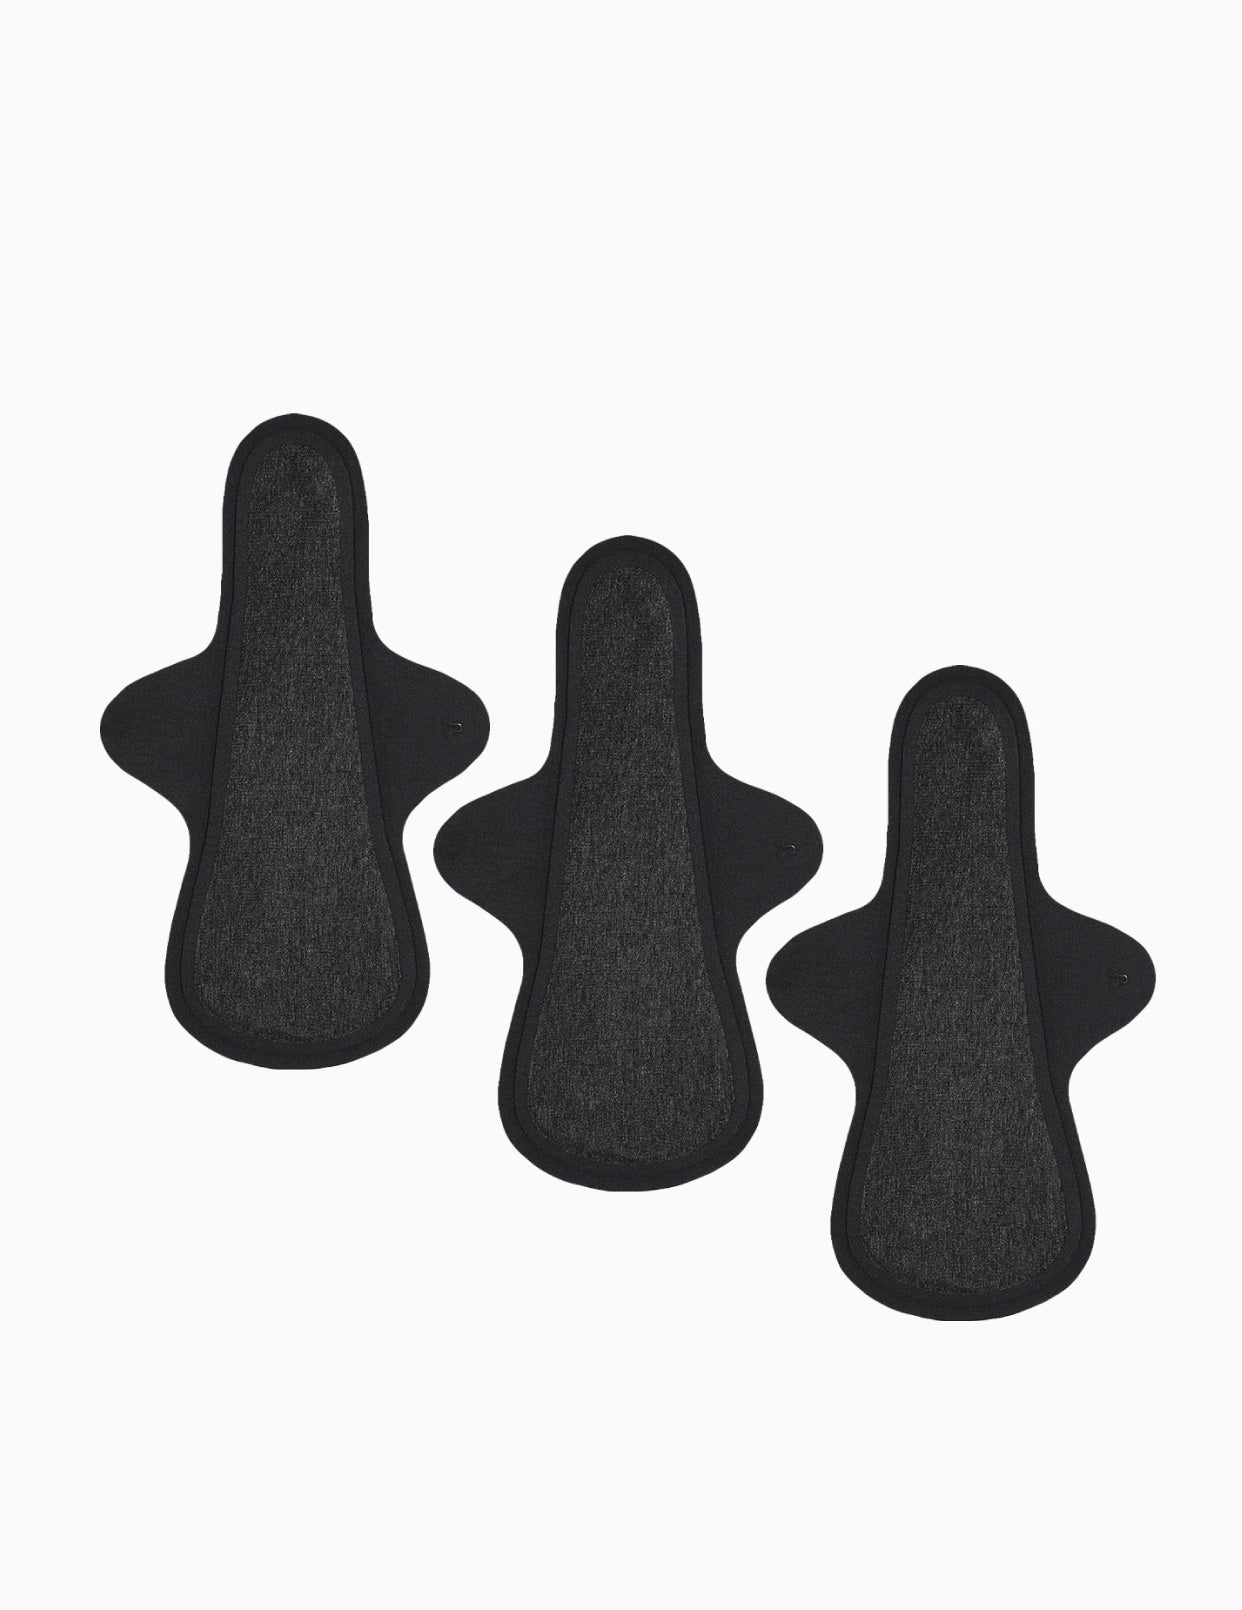 Reusable Pads for Incontinence – Set of 3